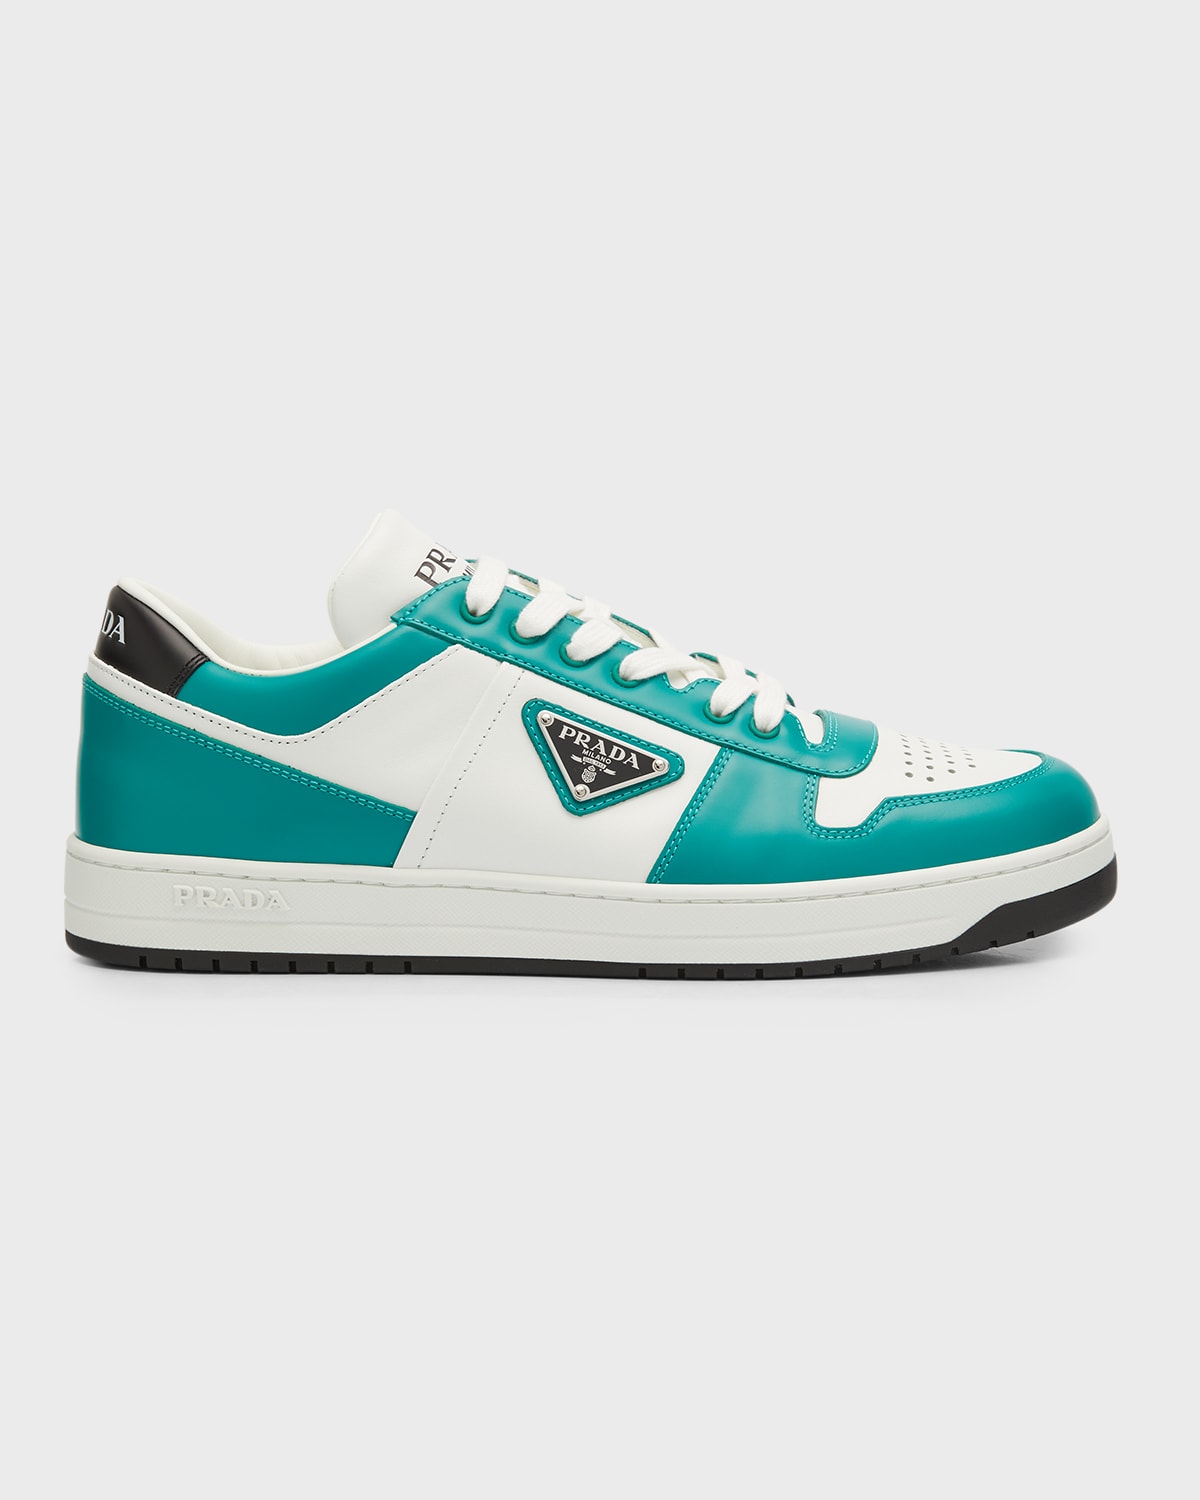 PRADA MEN'S DOWNTOWN TRIANGLE LOGO LEATHER LOW-TOP SNEAKERS